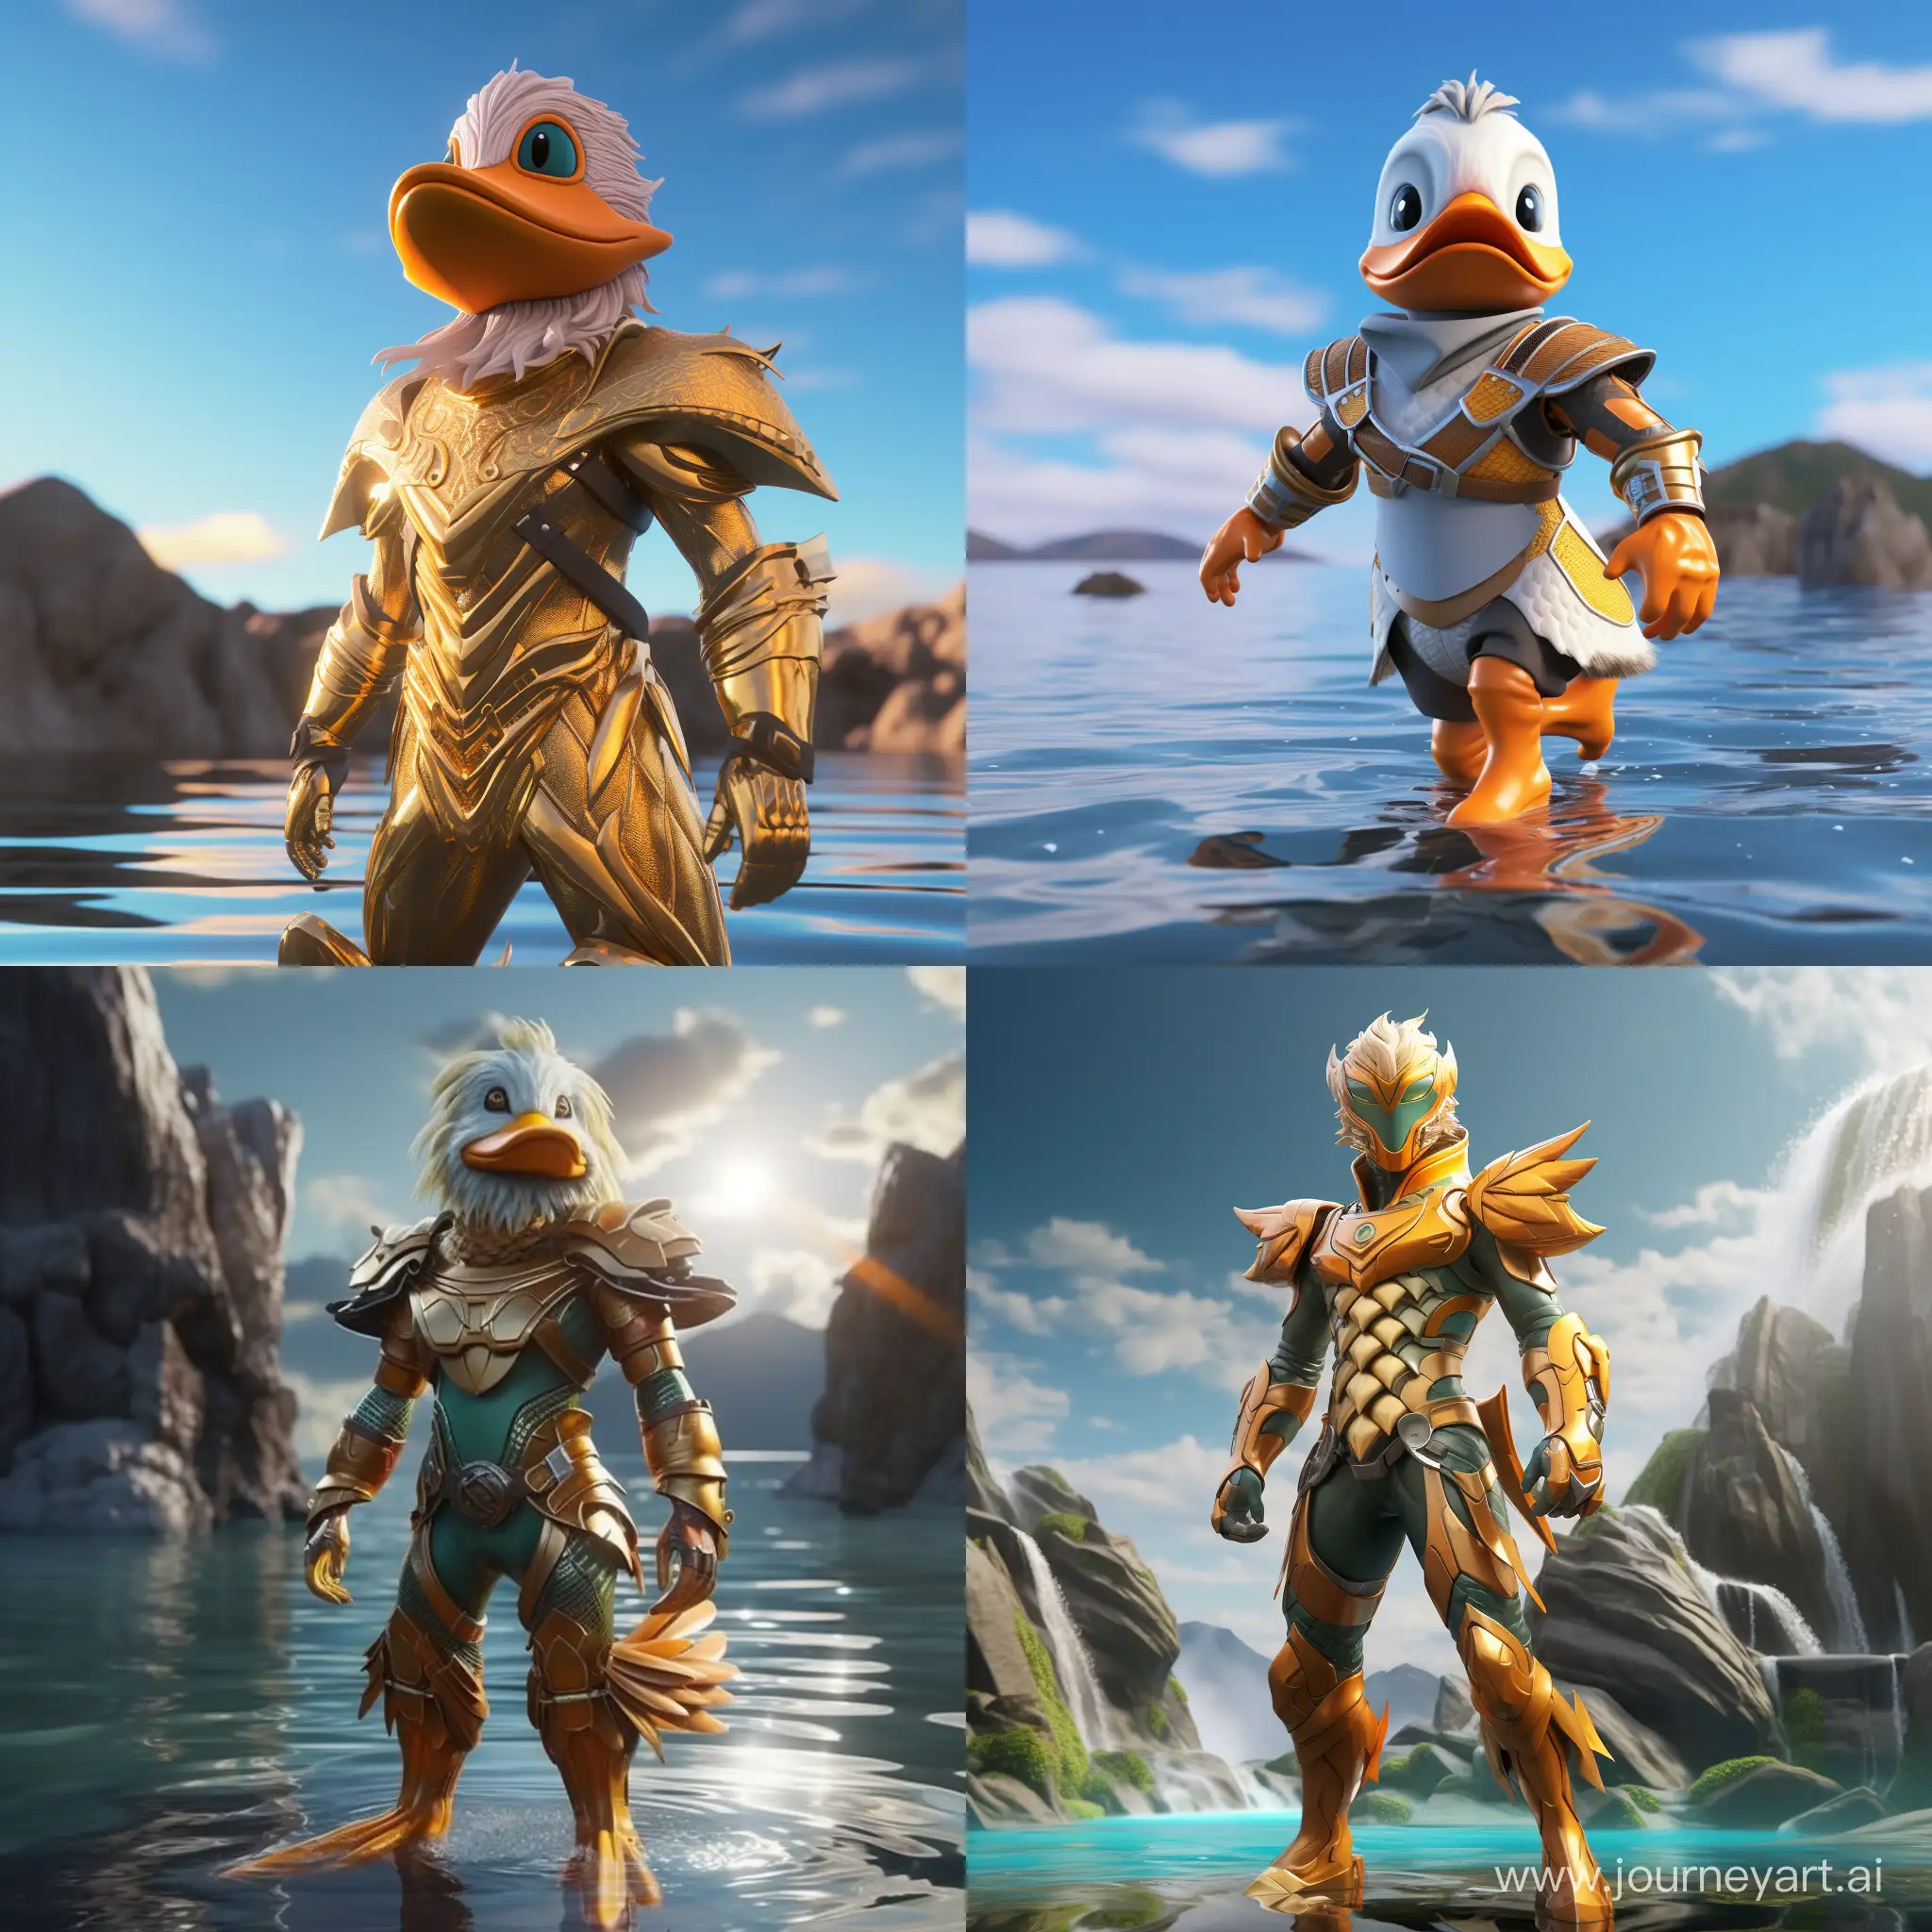 One 3d anime duck .fully dress as aquaman emerges from water.stand infront